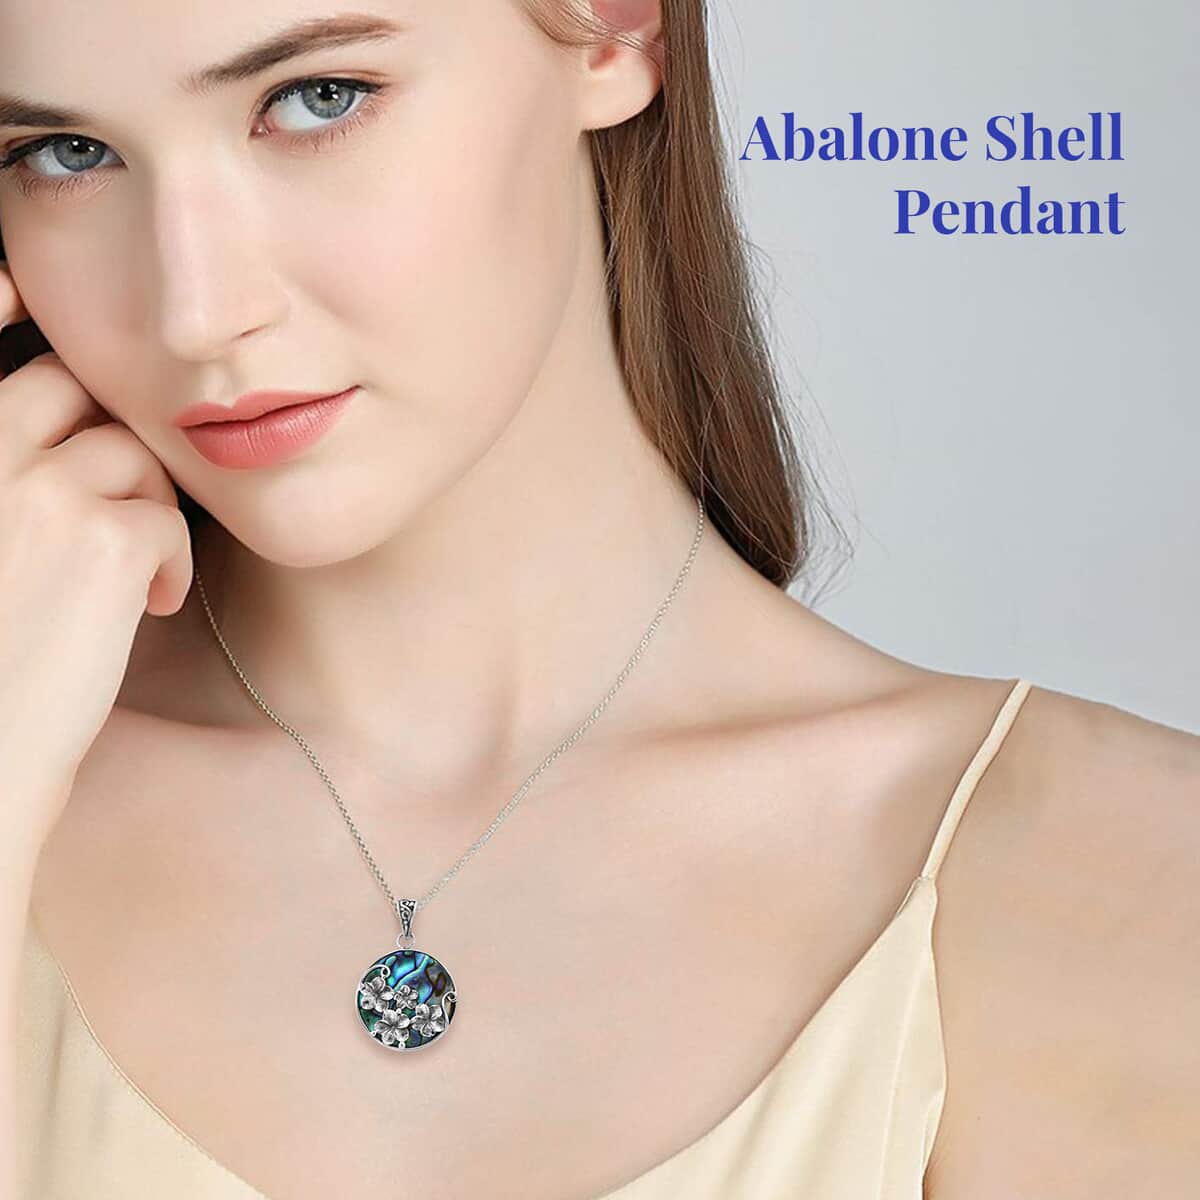 Abalone Shell Pendant in Sterling Silver, Silver Solitaire Pendant, Beach Fashion Jewelry For Women image number 2